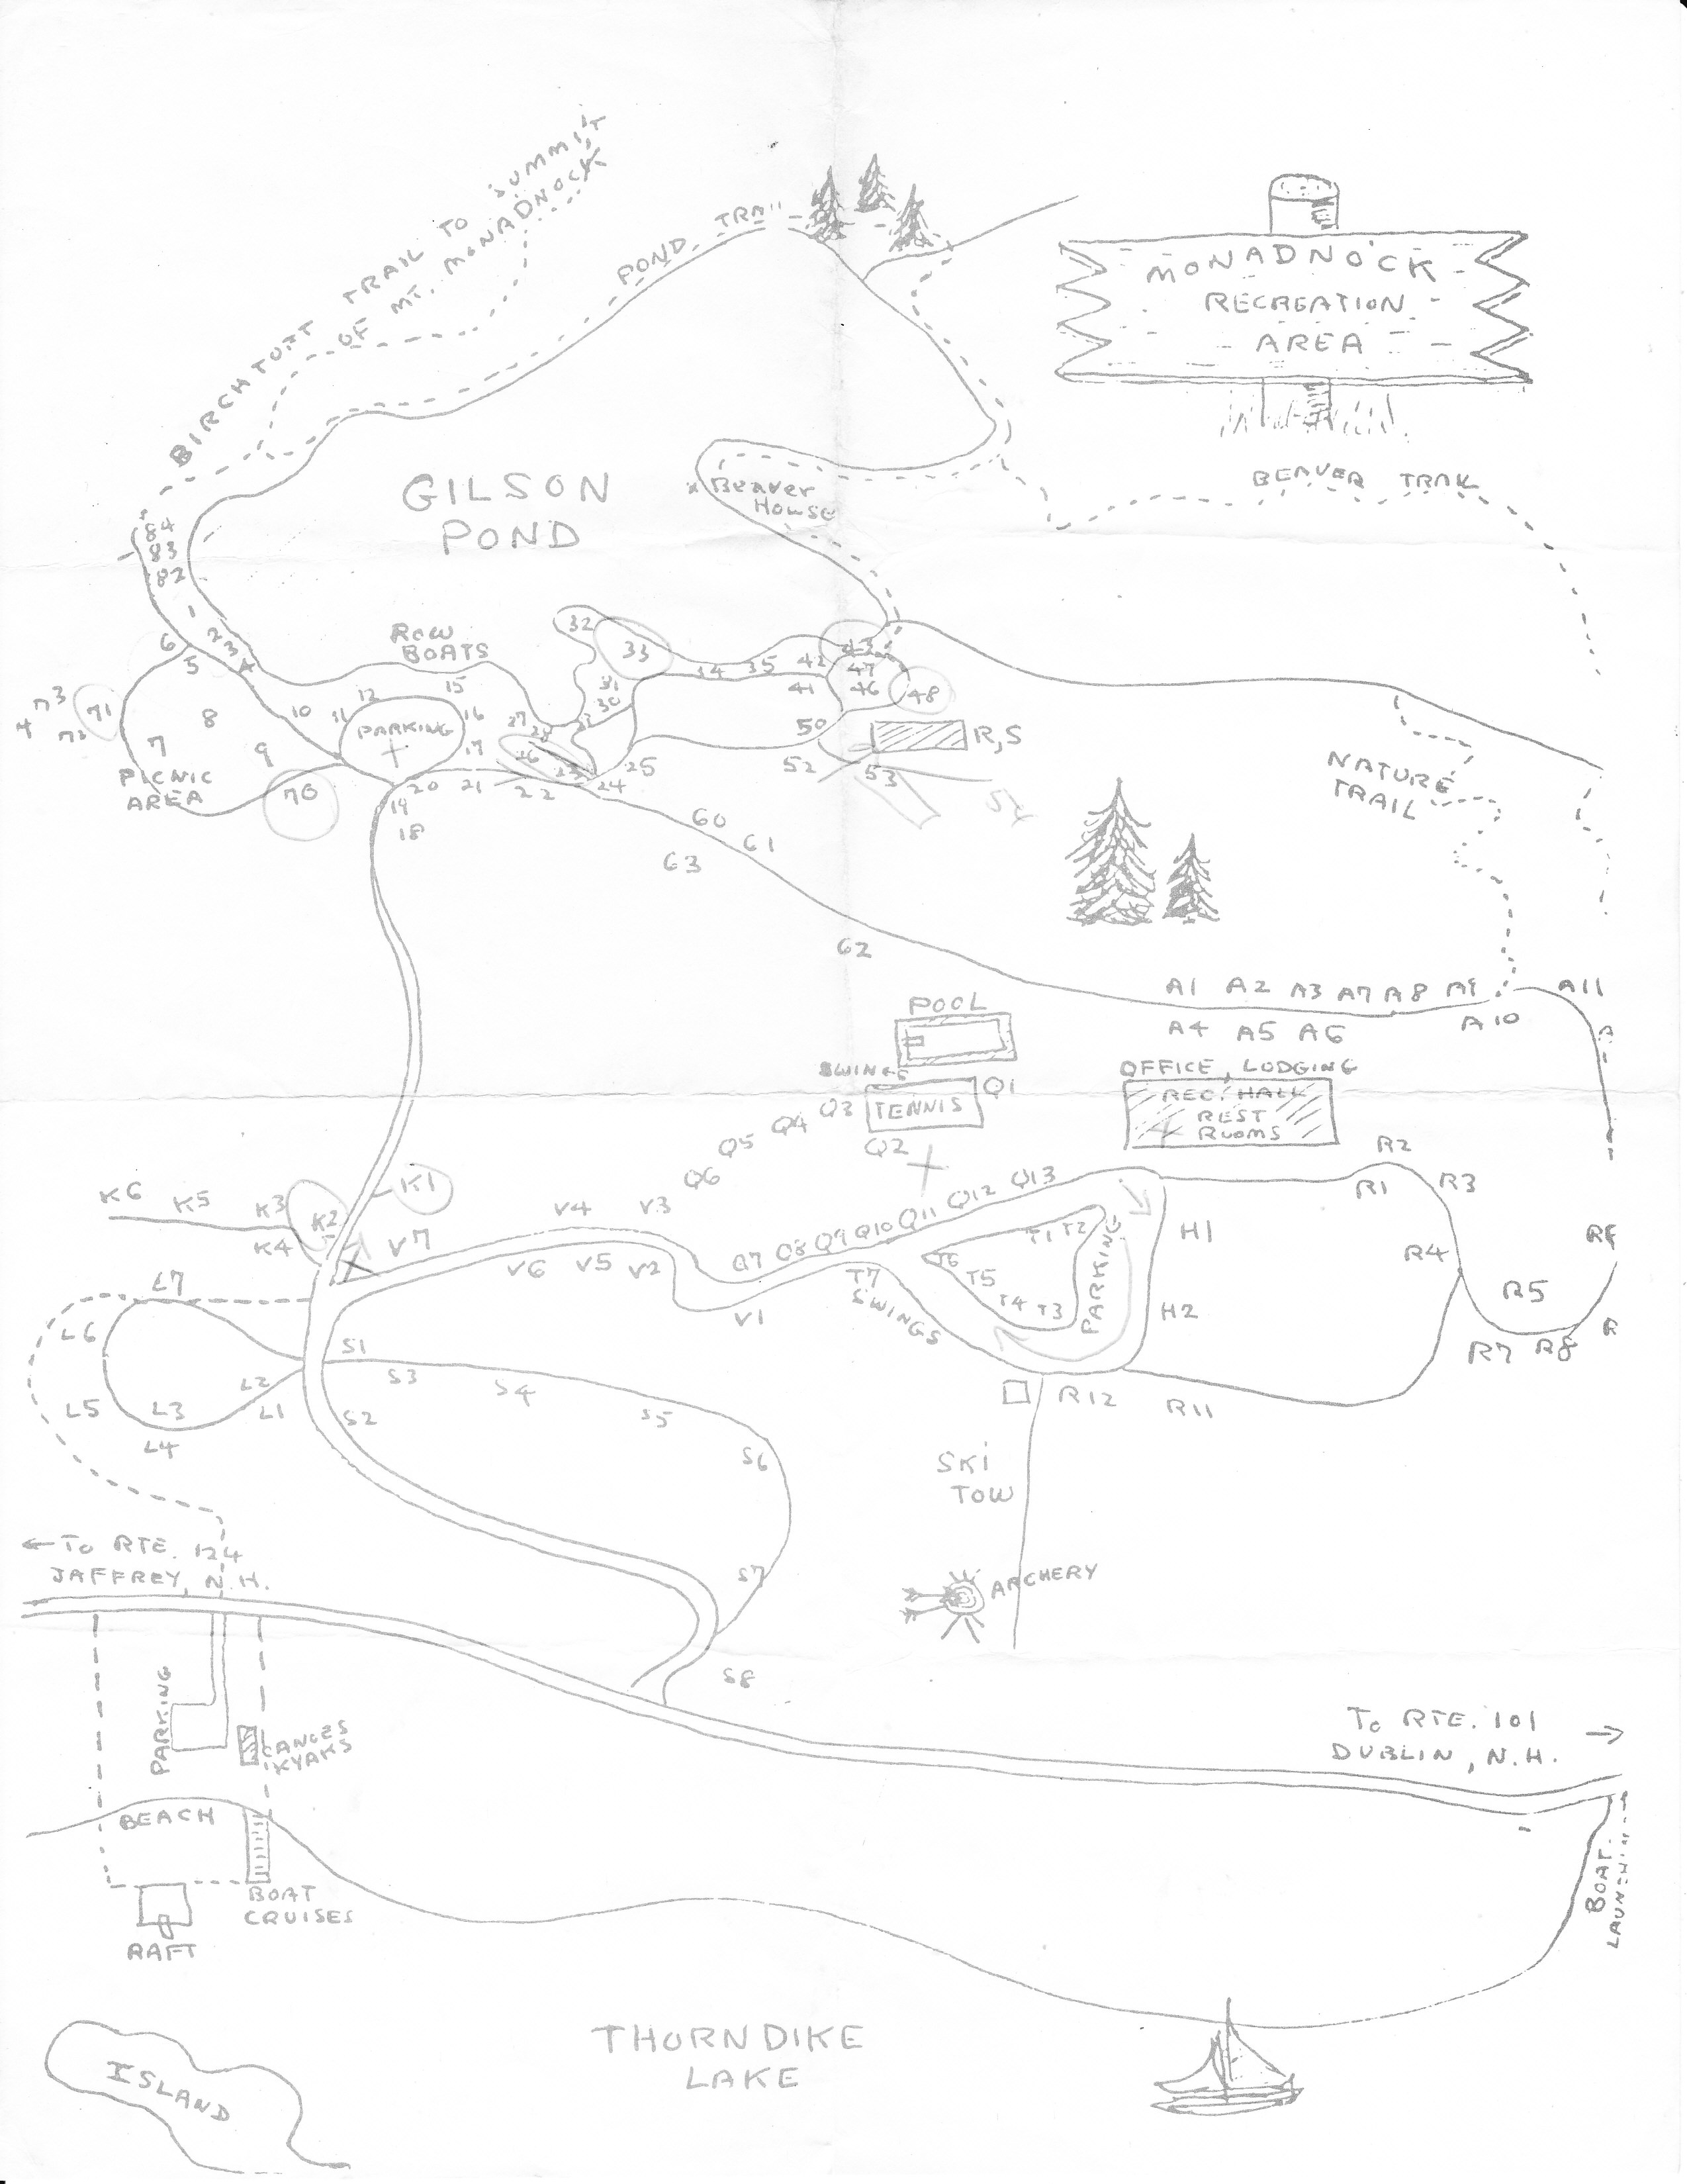 Another map of the Monadnock Recreation Area. Courtesy of the Monadnock State Park Archives.